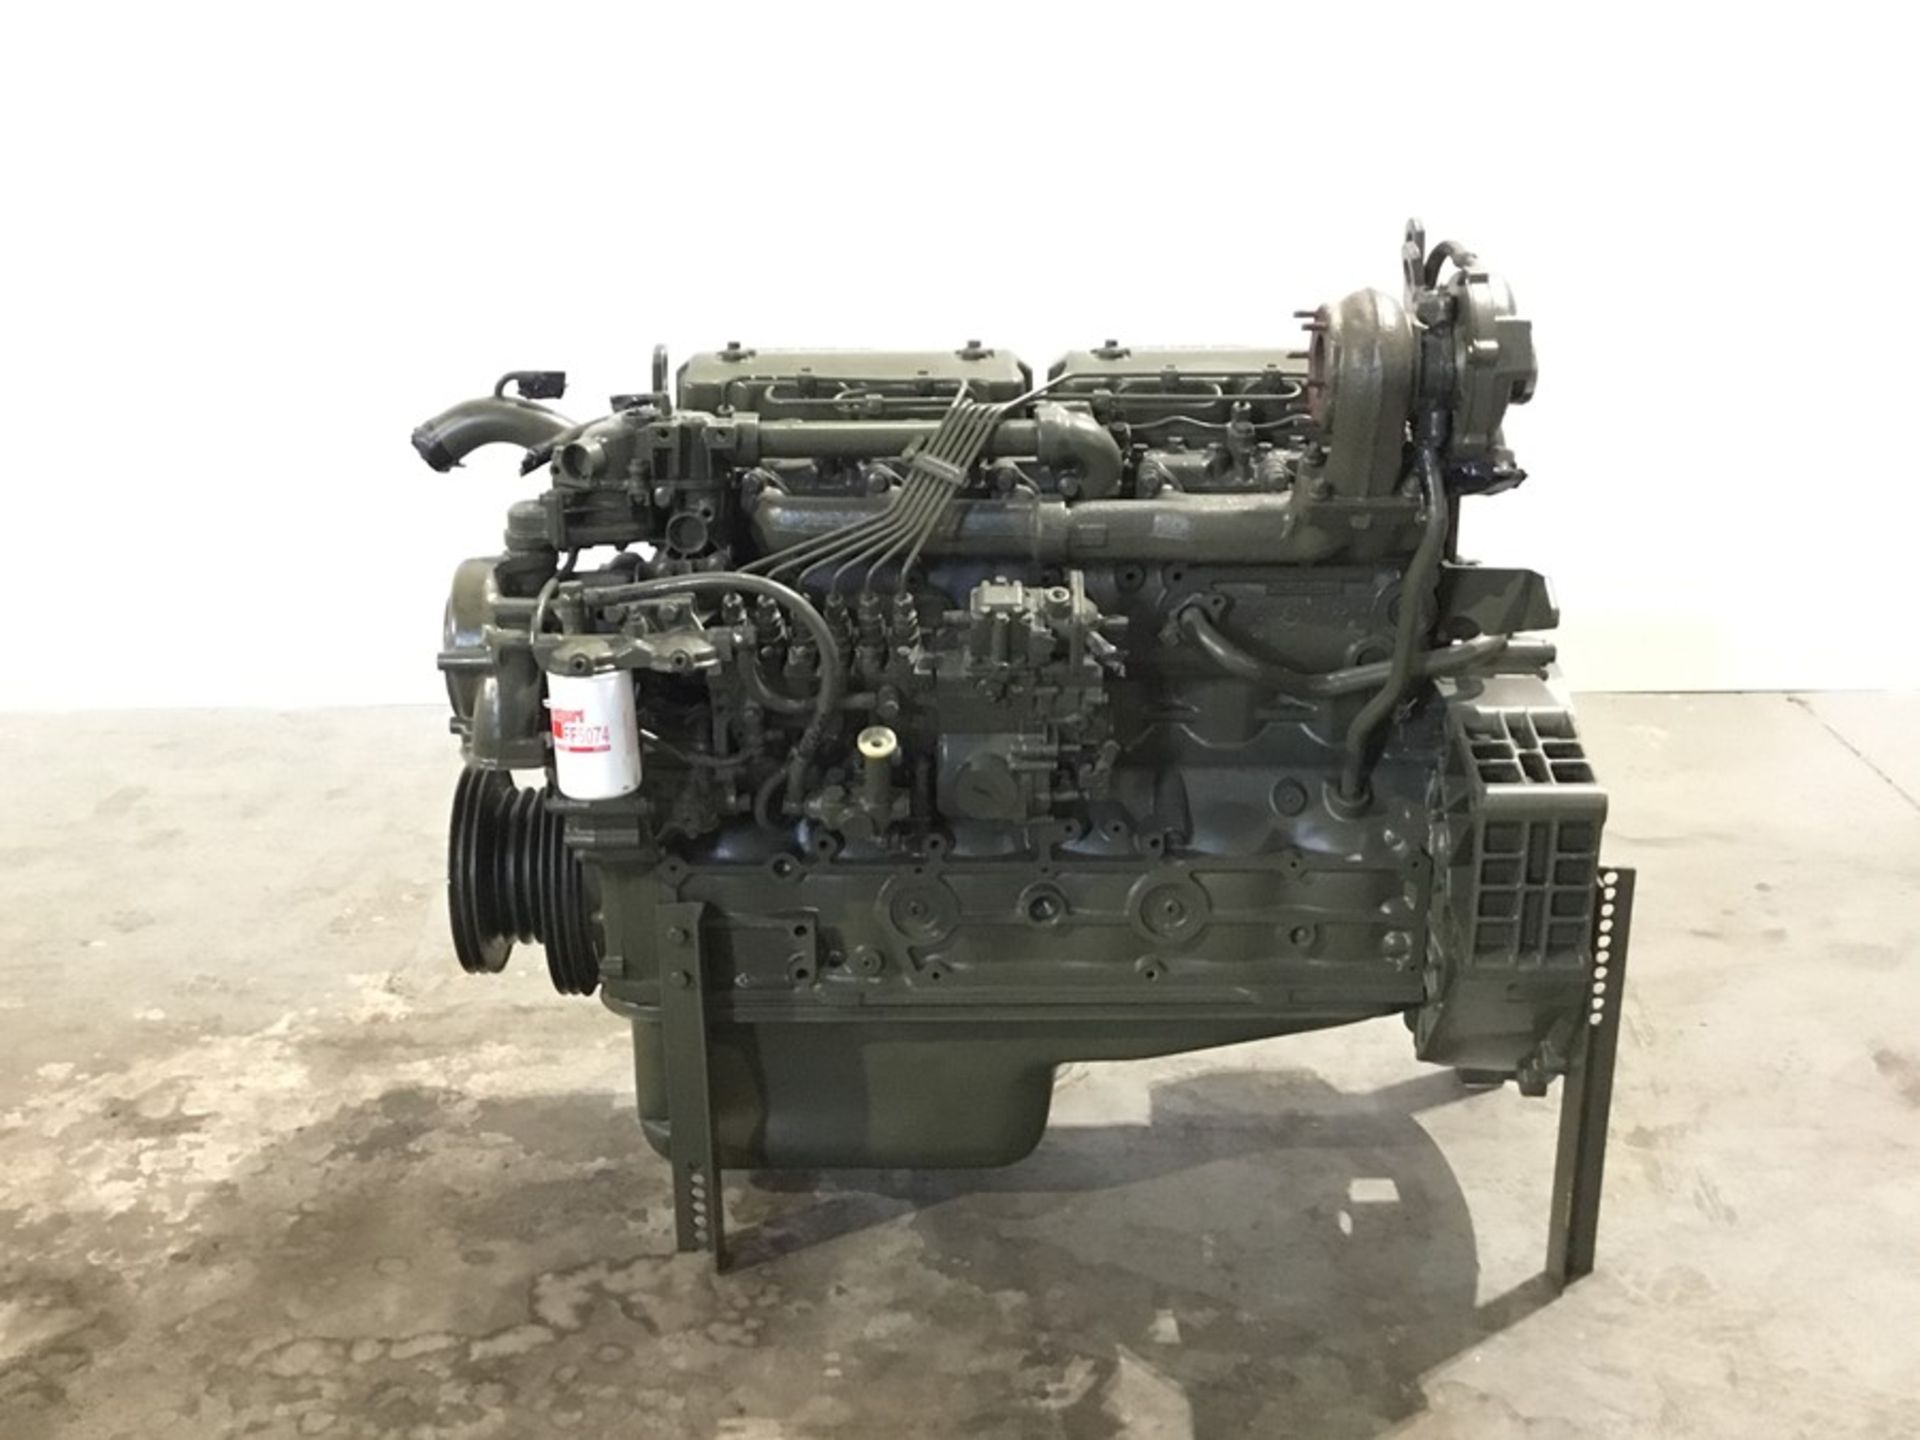 Volvo D6 Diesel Engine: Volvo D6 6Cyl Turbo low hours - Image 12 of 18